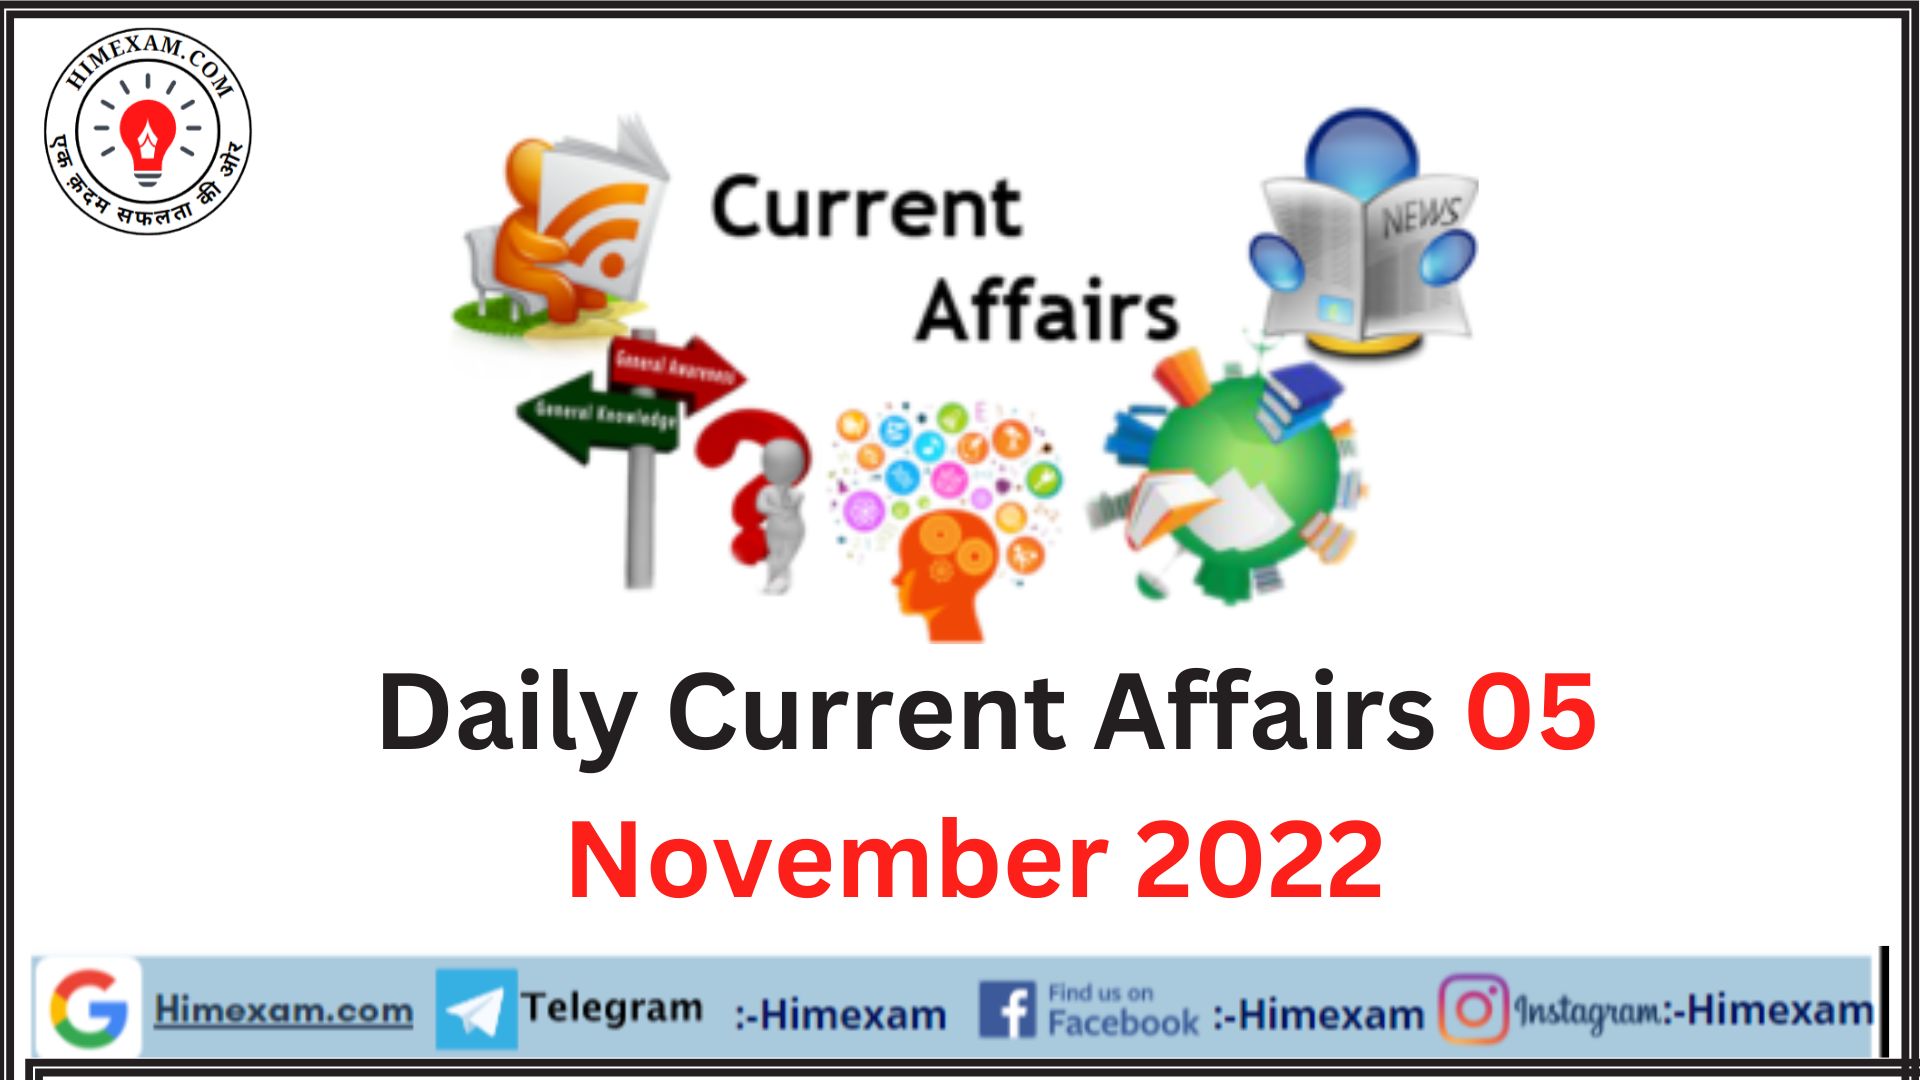 Daily Current Affairs 05 November 2022